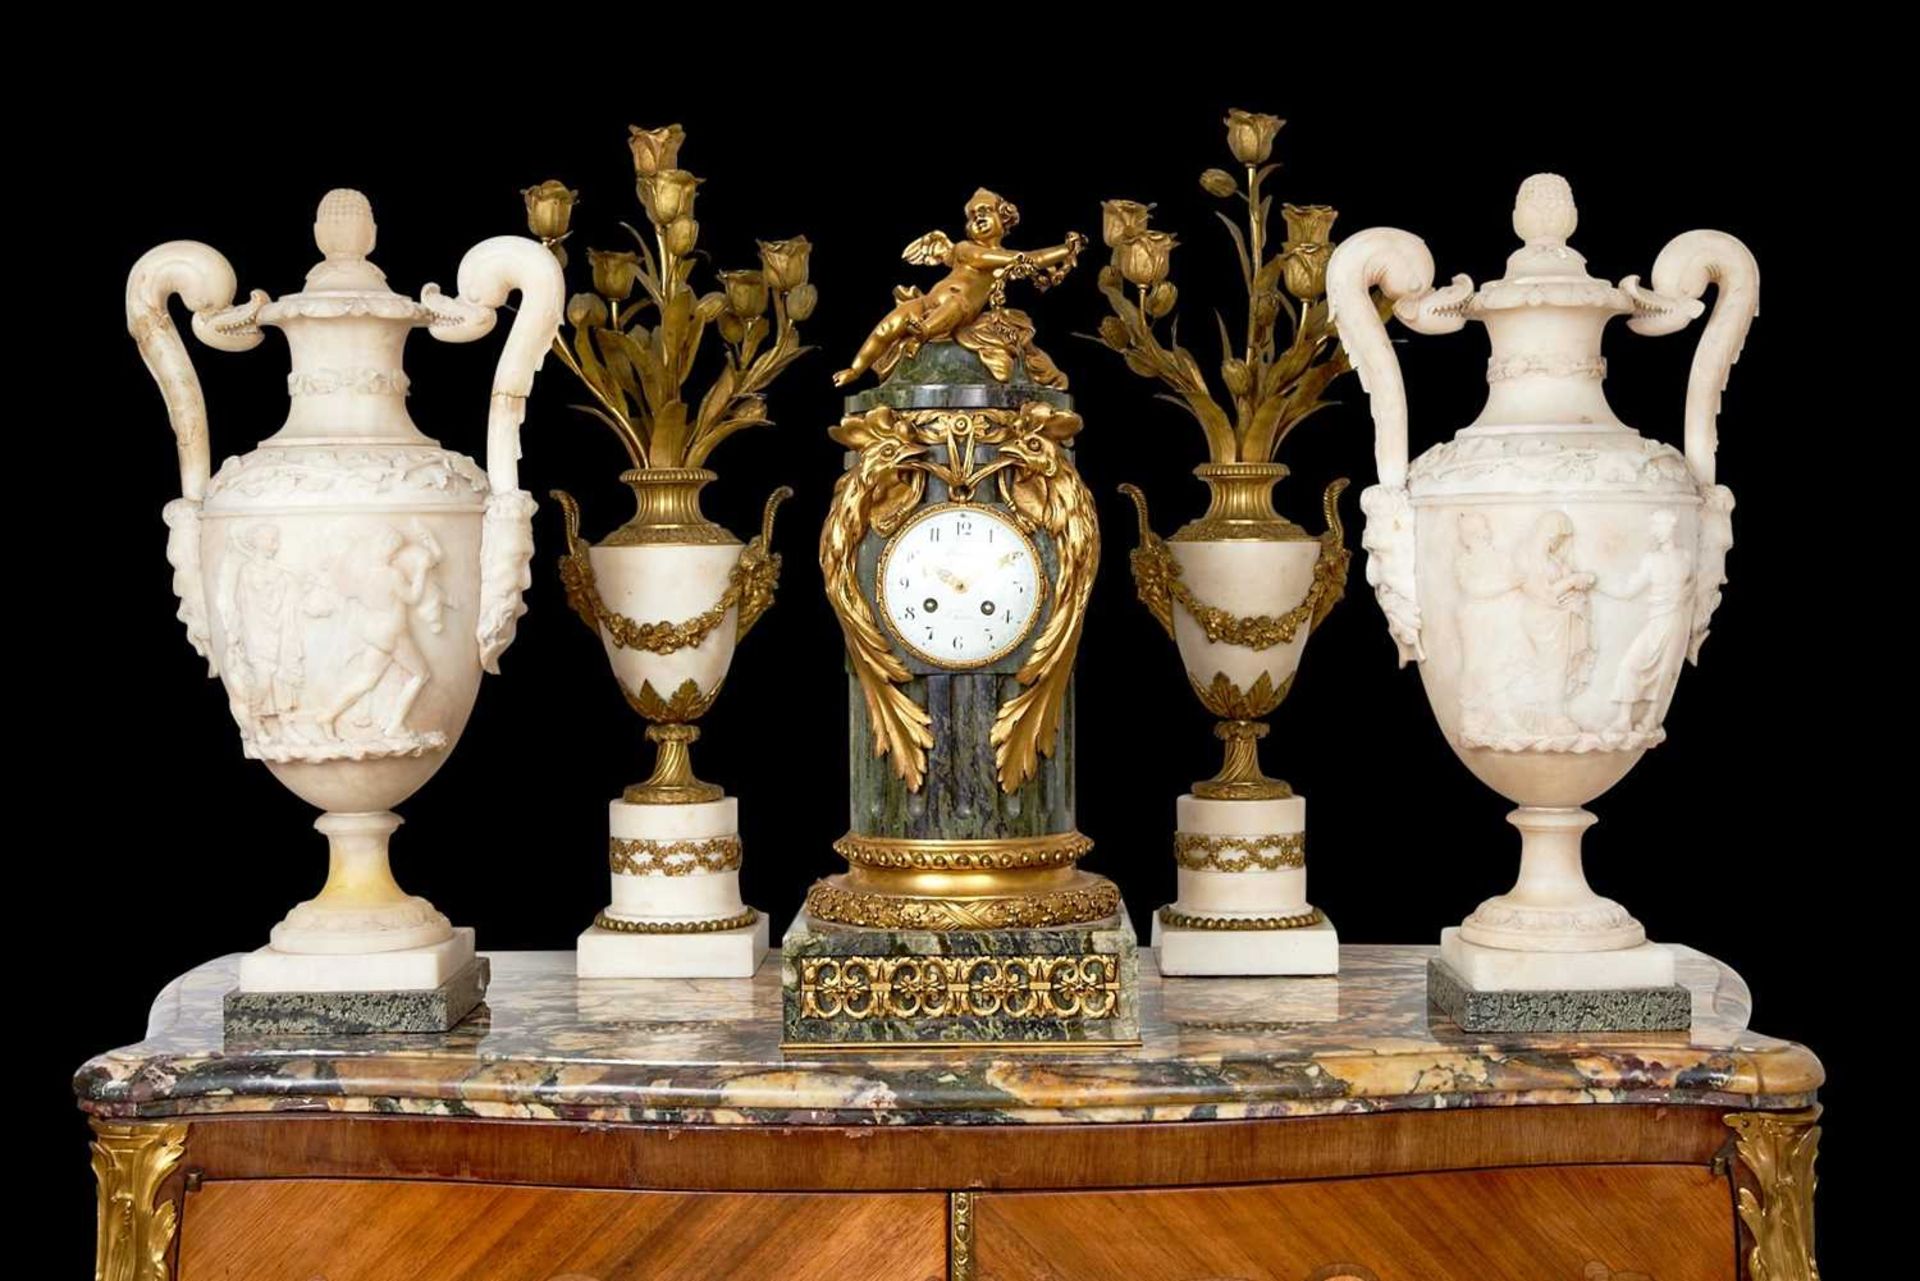 A LARGE PAIR OF 19TH CENTURY ITALIAN ALABASTER URNS AND COVERS IN THE STYLE OF PIRANESI - Image 7 of 12